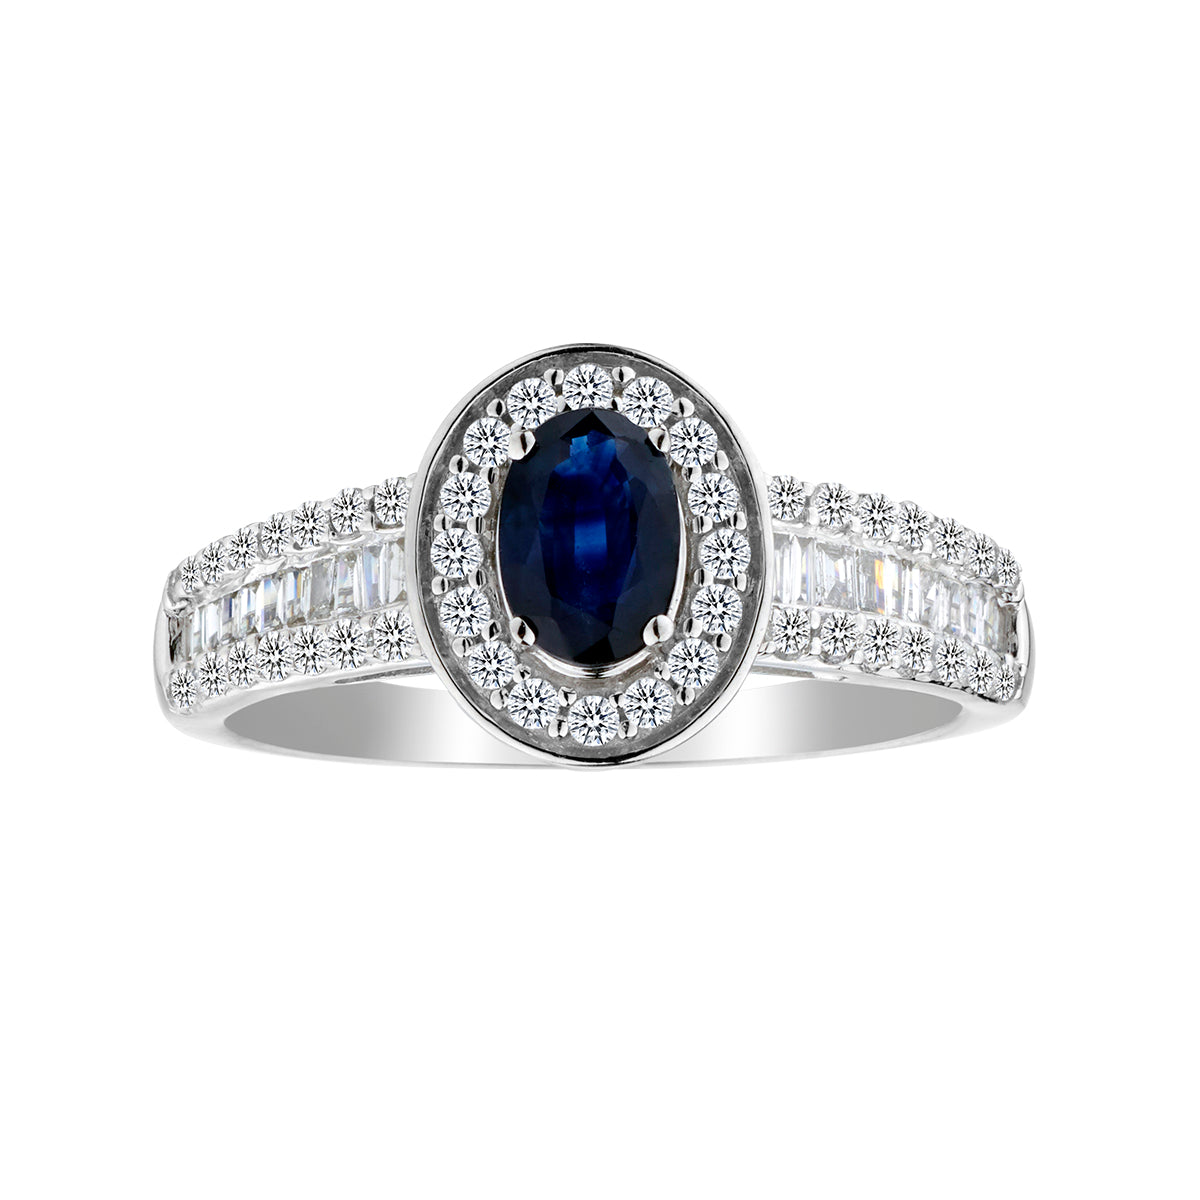 .50 Carat Oval Sapphire & Diamond Ring,  14kt White Gold. Gemstone Rings. Griffin Jewellery Designs